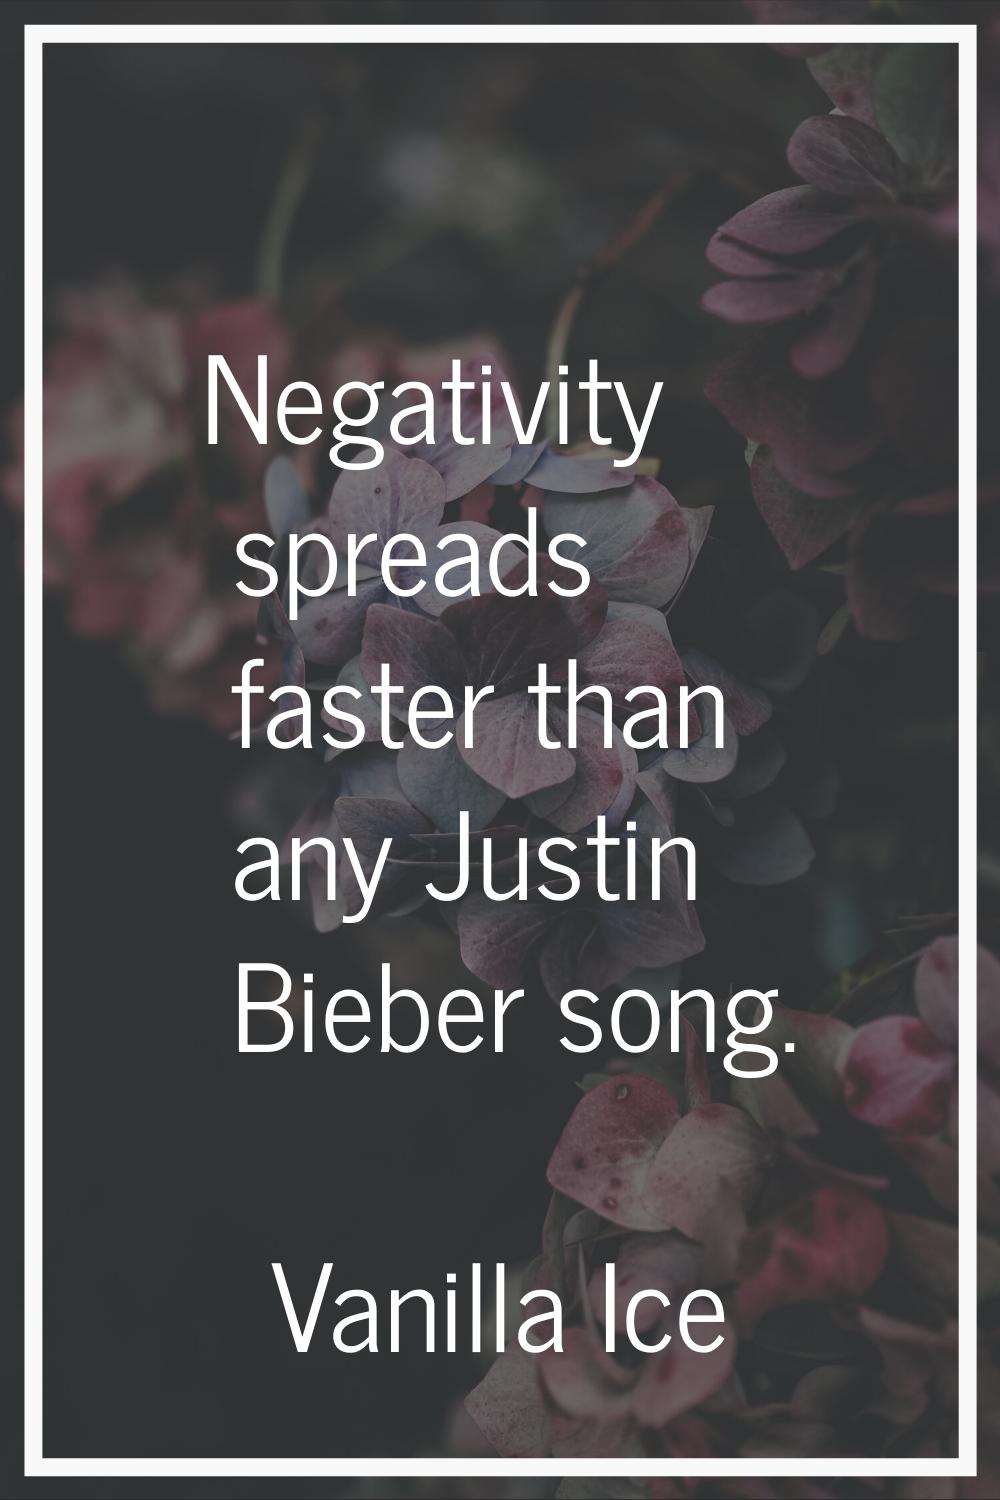 Negativity spreads faster than any Justin Bieber song.